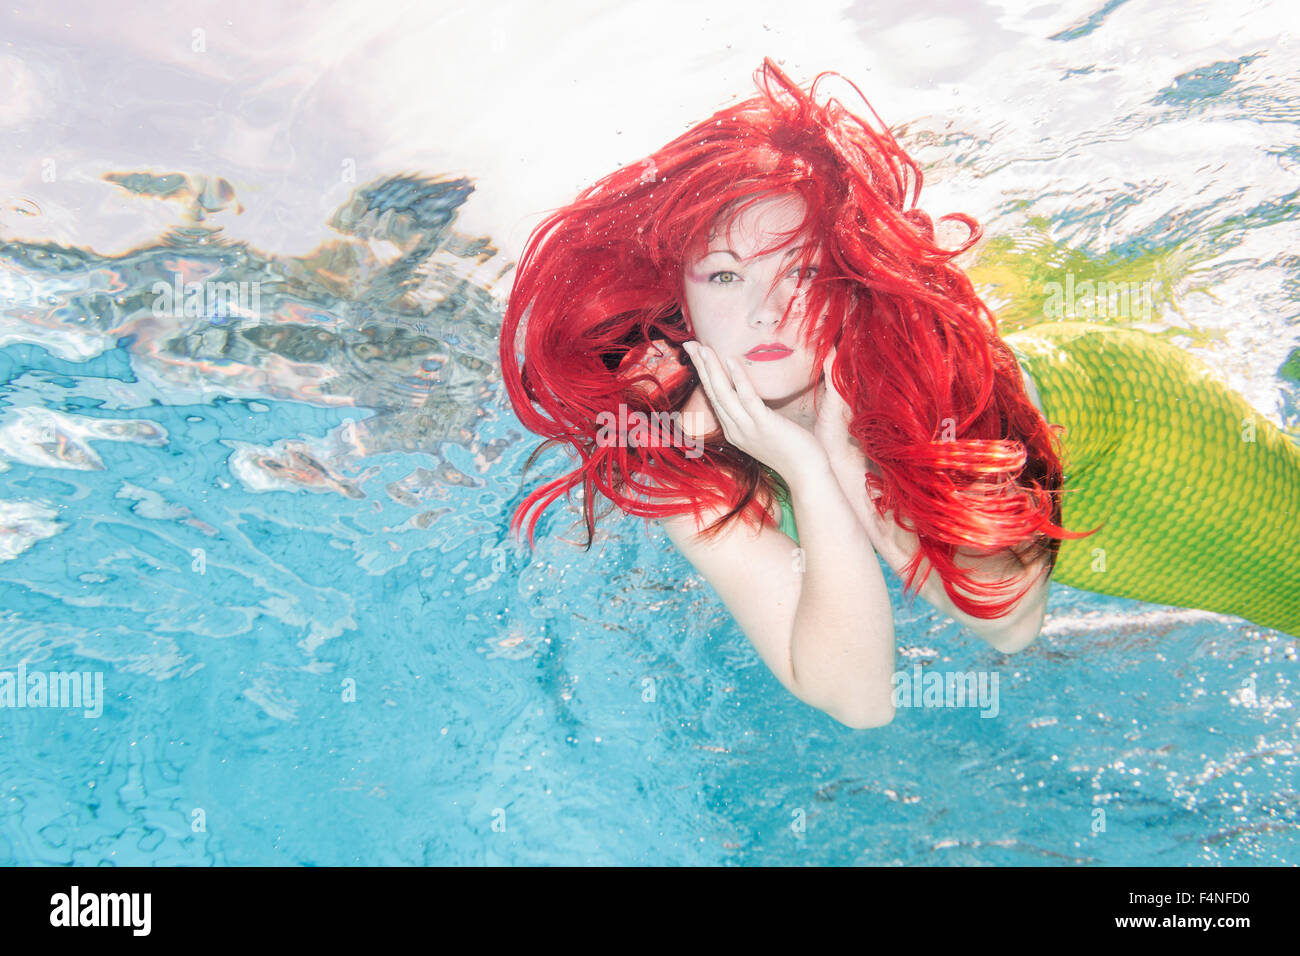 Young woman in the disguise of Arielle, the little mermaid, underwater Stock Photo